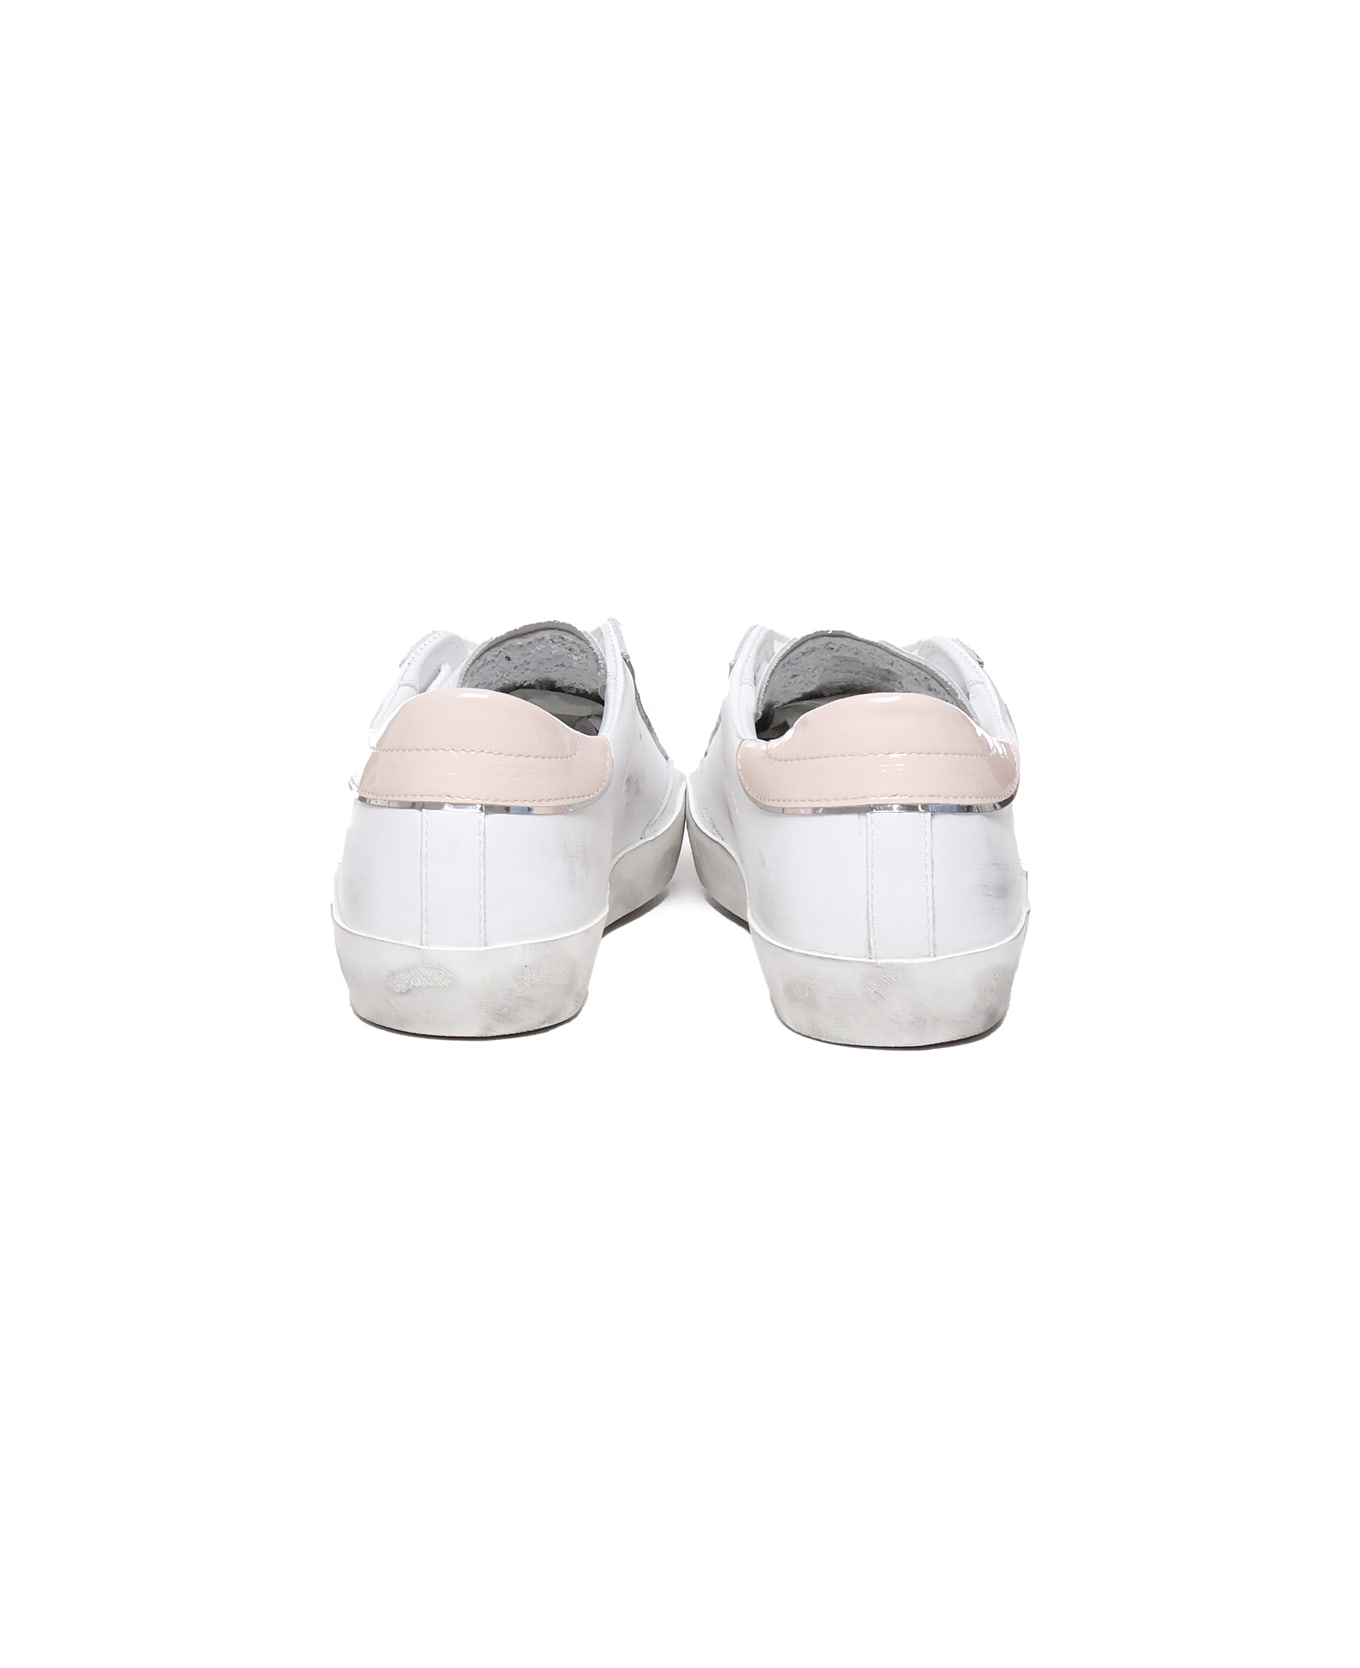 Philippe Model Prsx Casual Leather Sneaker - White, pink スニーカー